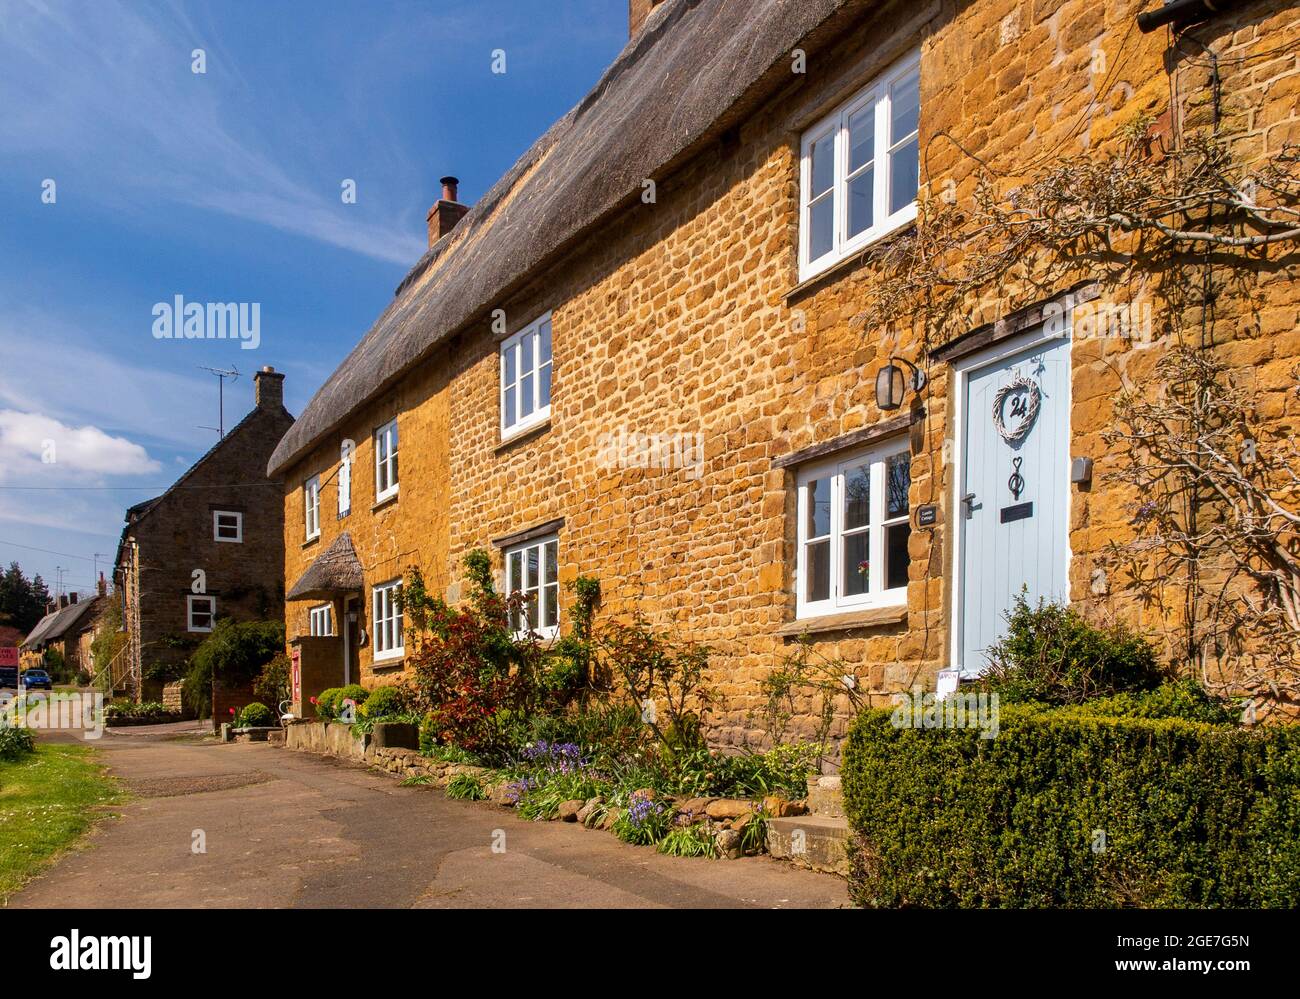 UK, England, Oxfordshire, Wroxton, Main Street, pretty thatched Cotswold stone cottages Stock Photo